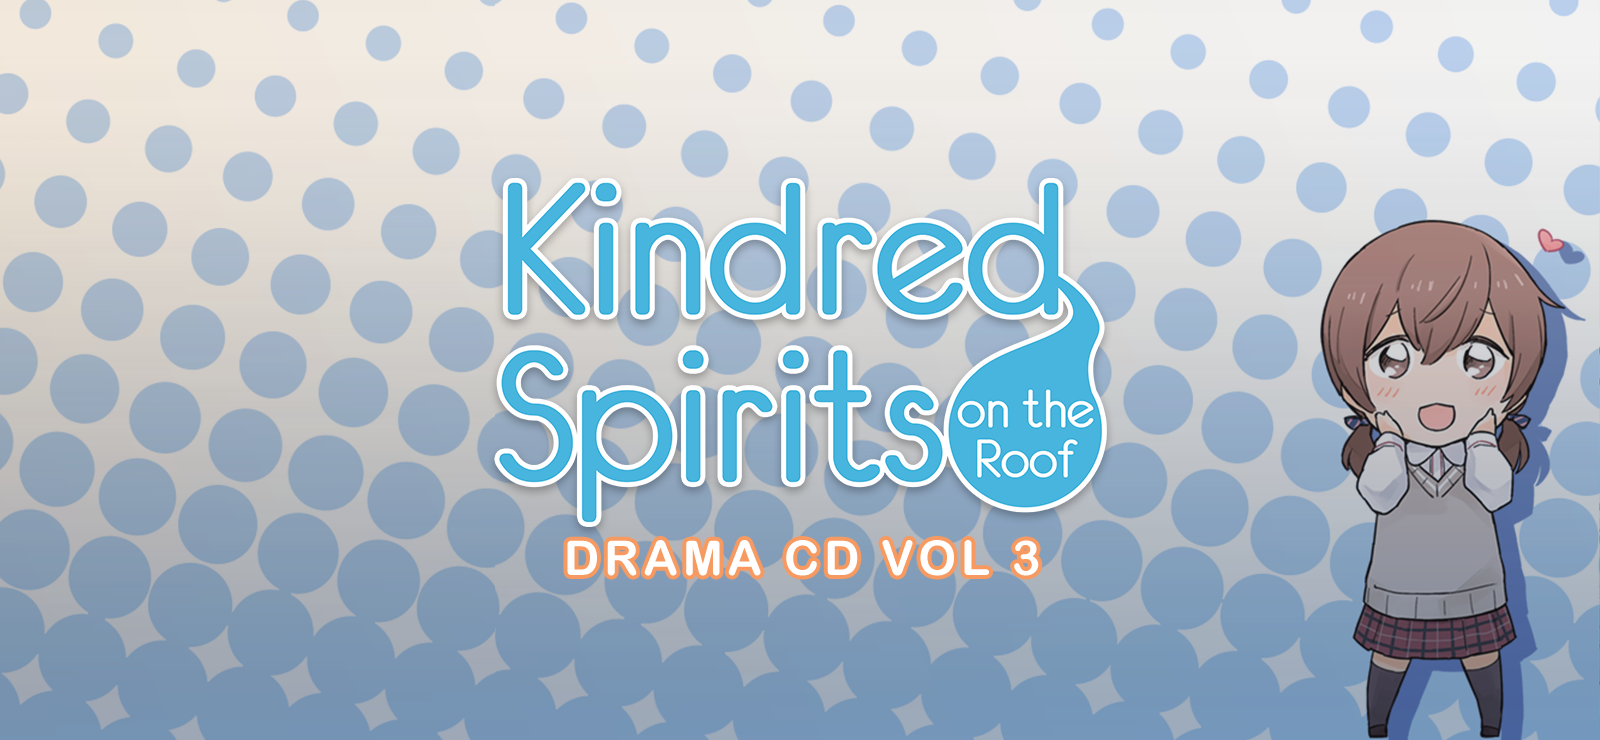 Kindred Spirits On The Roof Drama CD Vol.3